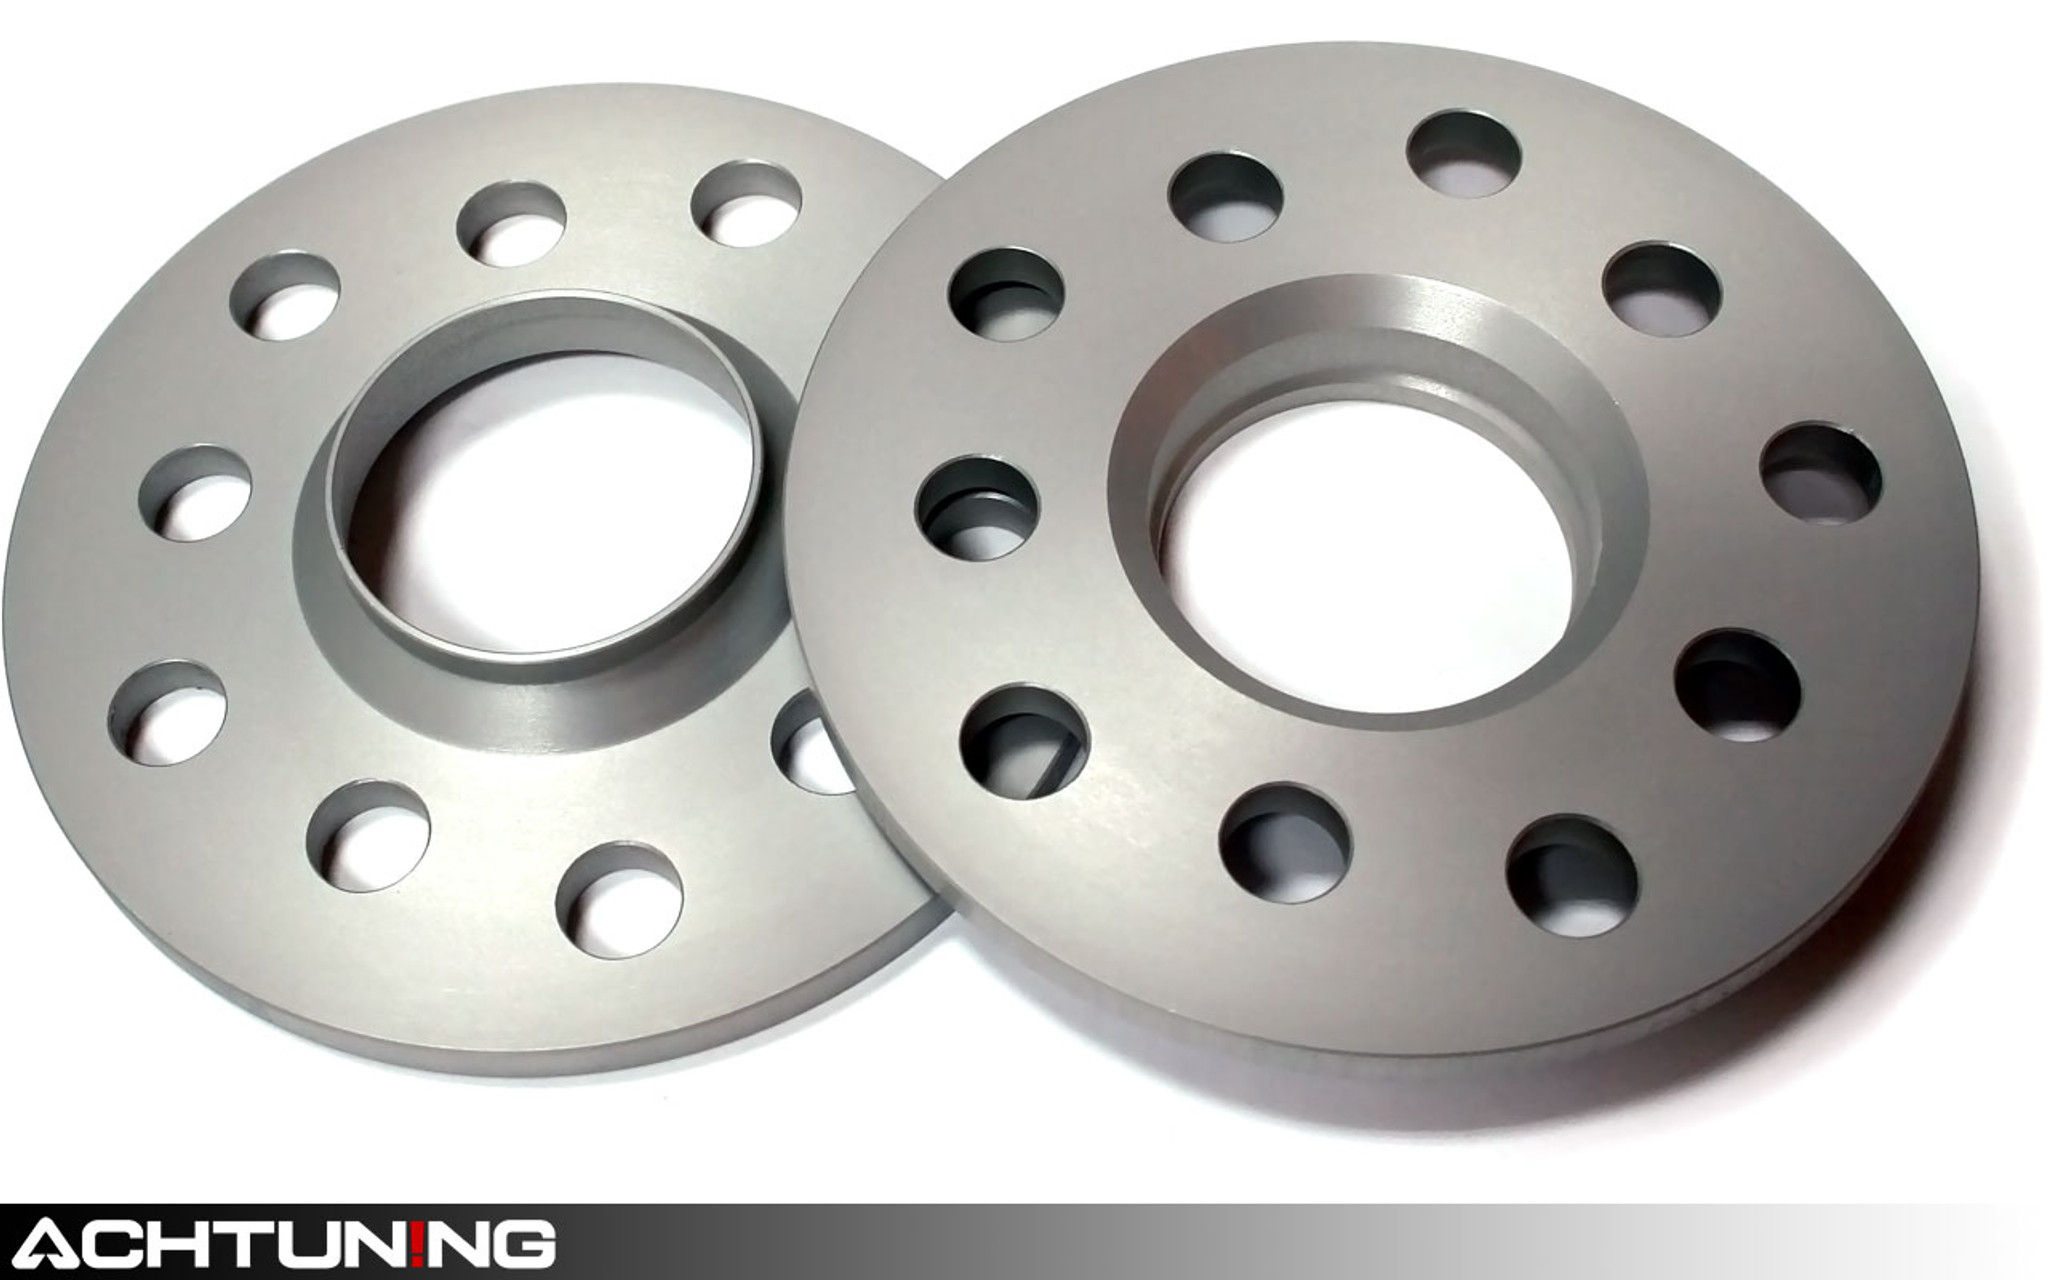 RS4 Audi RS3 2 x 8mm H&R Black Alloy Wheel Spacers Black Bolts 